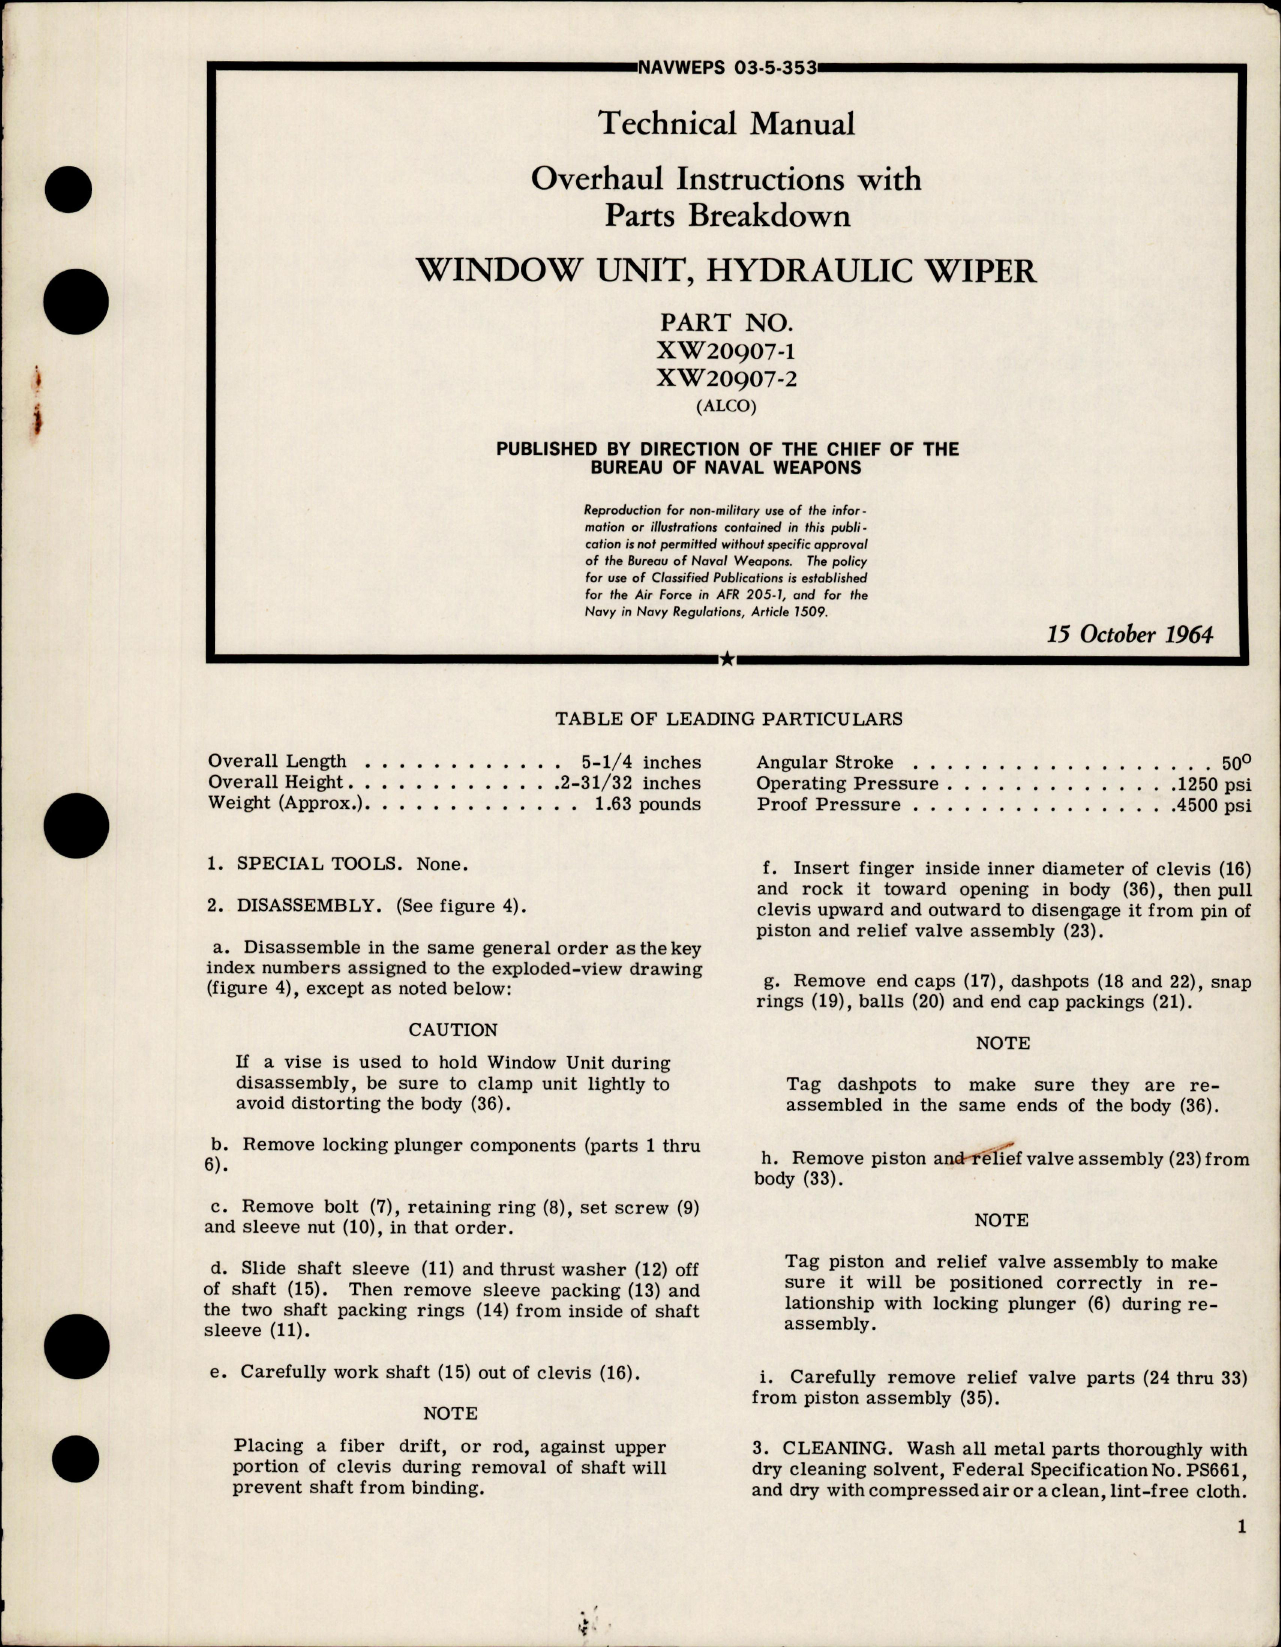 Sample page 1 from AirCorps Library document: Overhaul Instructions with Parts for Hydraulic Wiper Window Unit - Part XW20907-1 and XW20907-2 